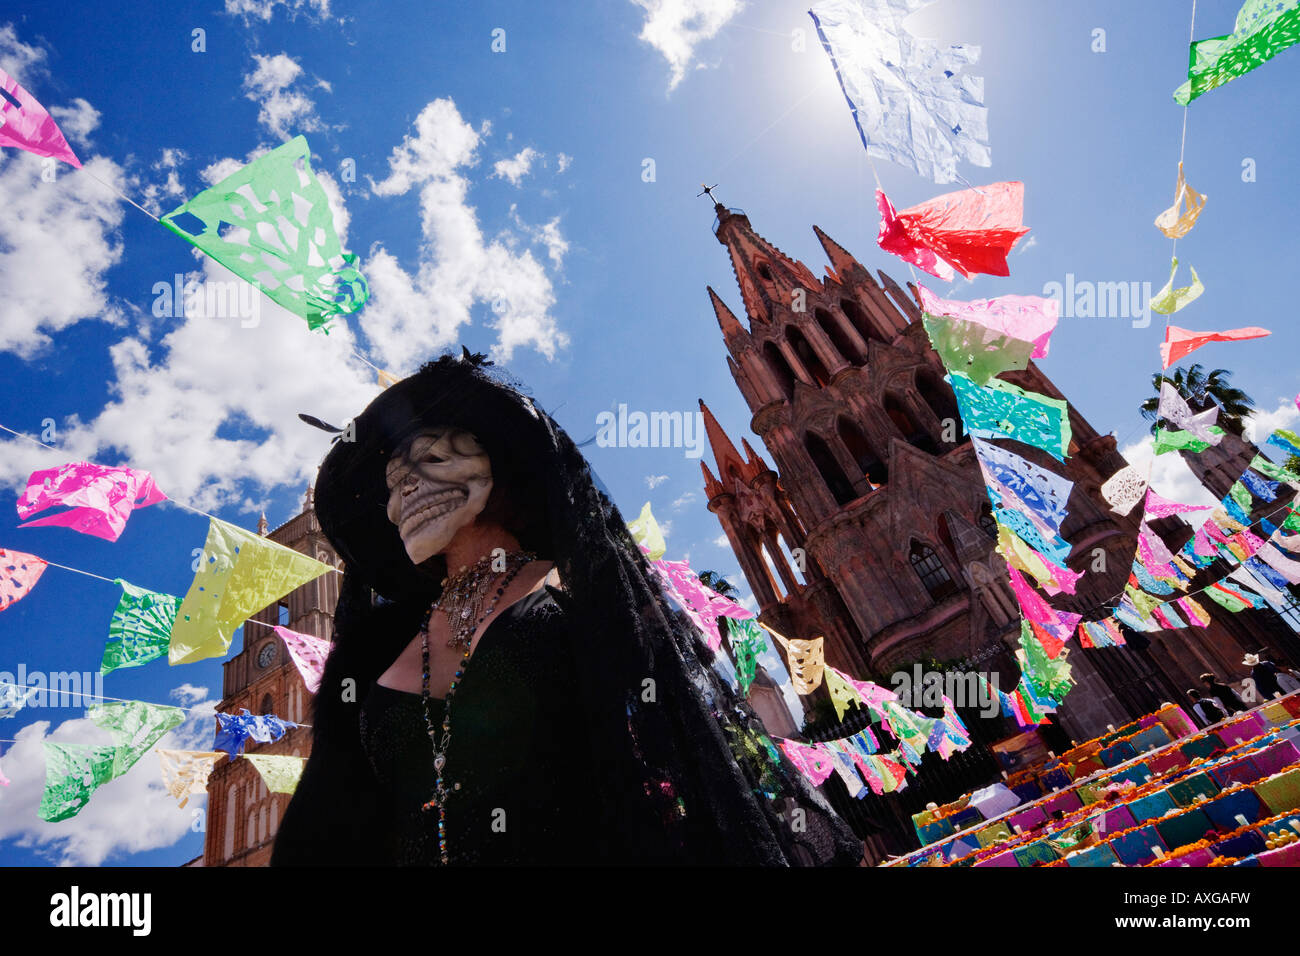 Woman Dressed Up for Day of the Dead, San Miguel de Allende, Mexico Stock Photo